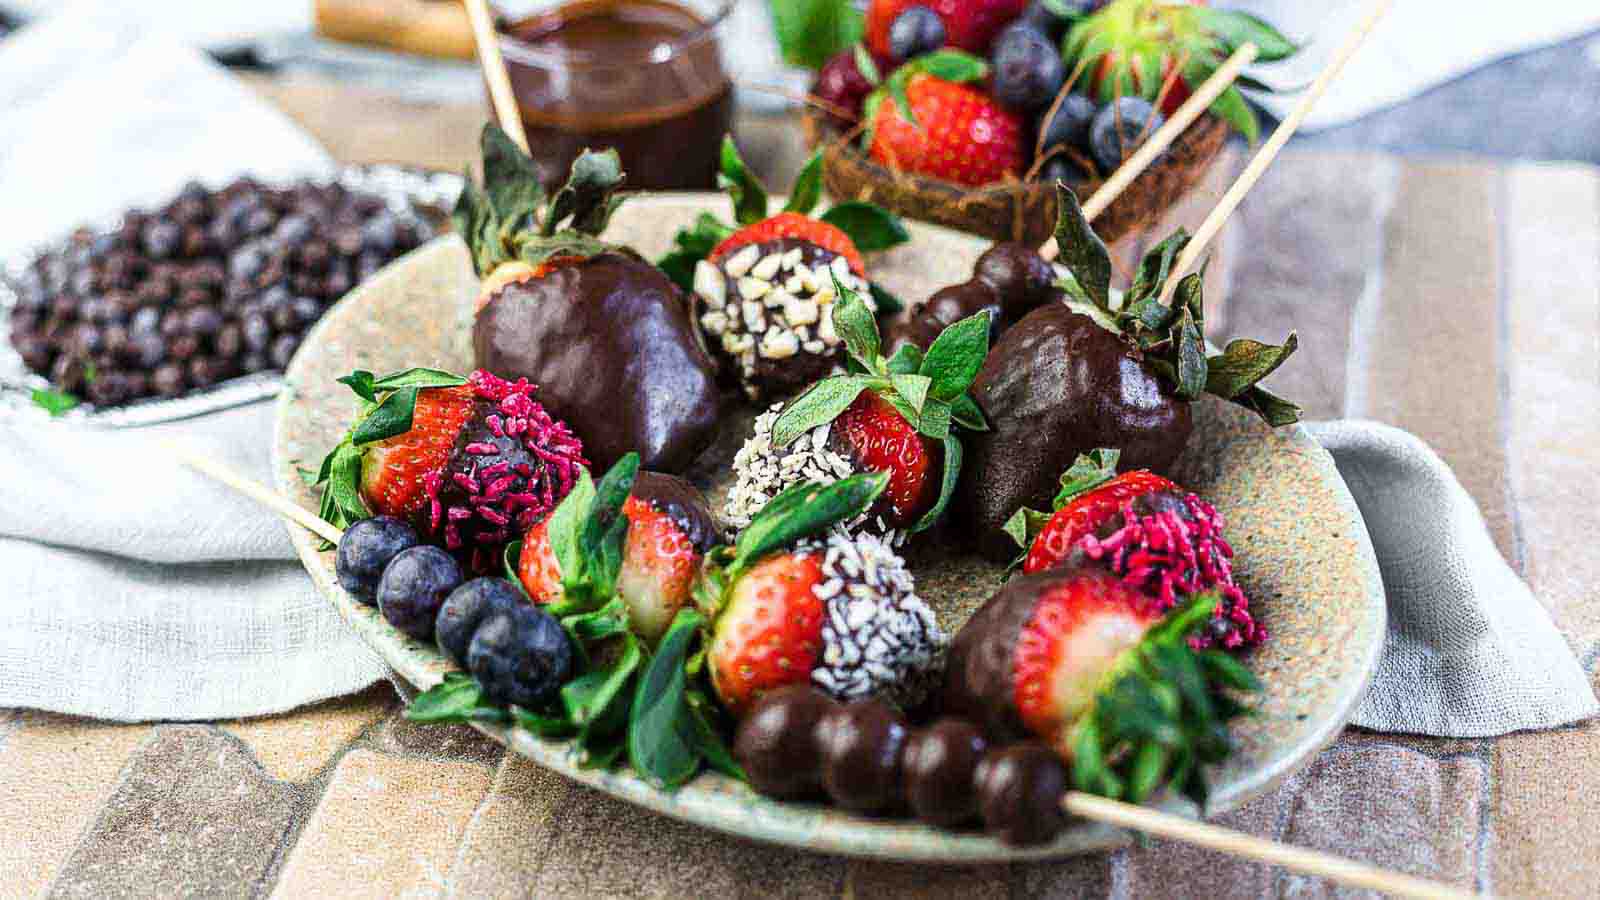 Chocolate covered strawberries on skewers on a plate.